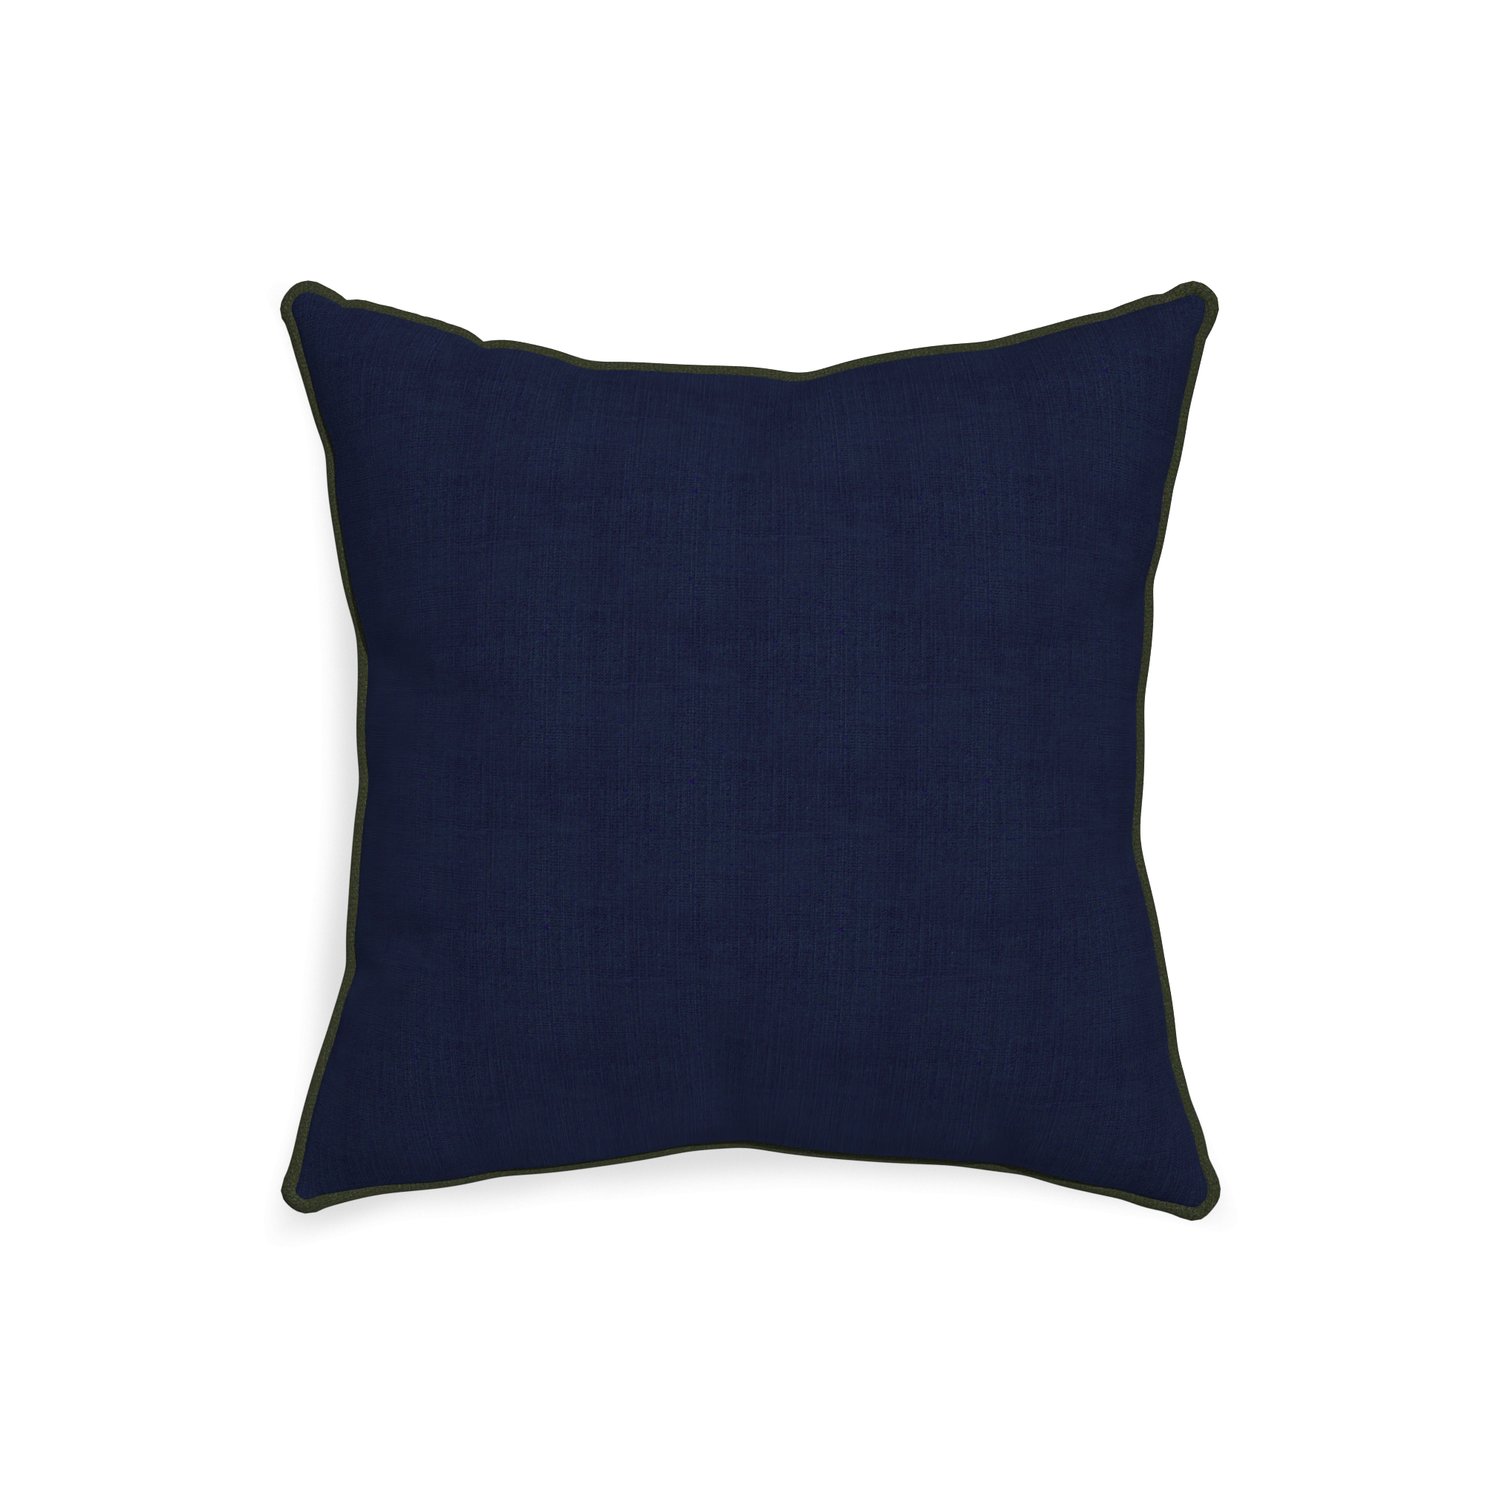 20-square midnight custom navy bluepillow with f piping on white background